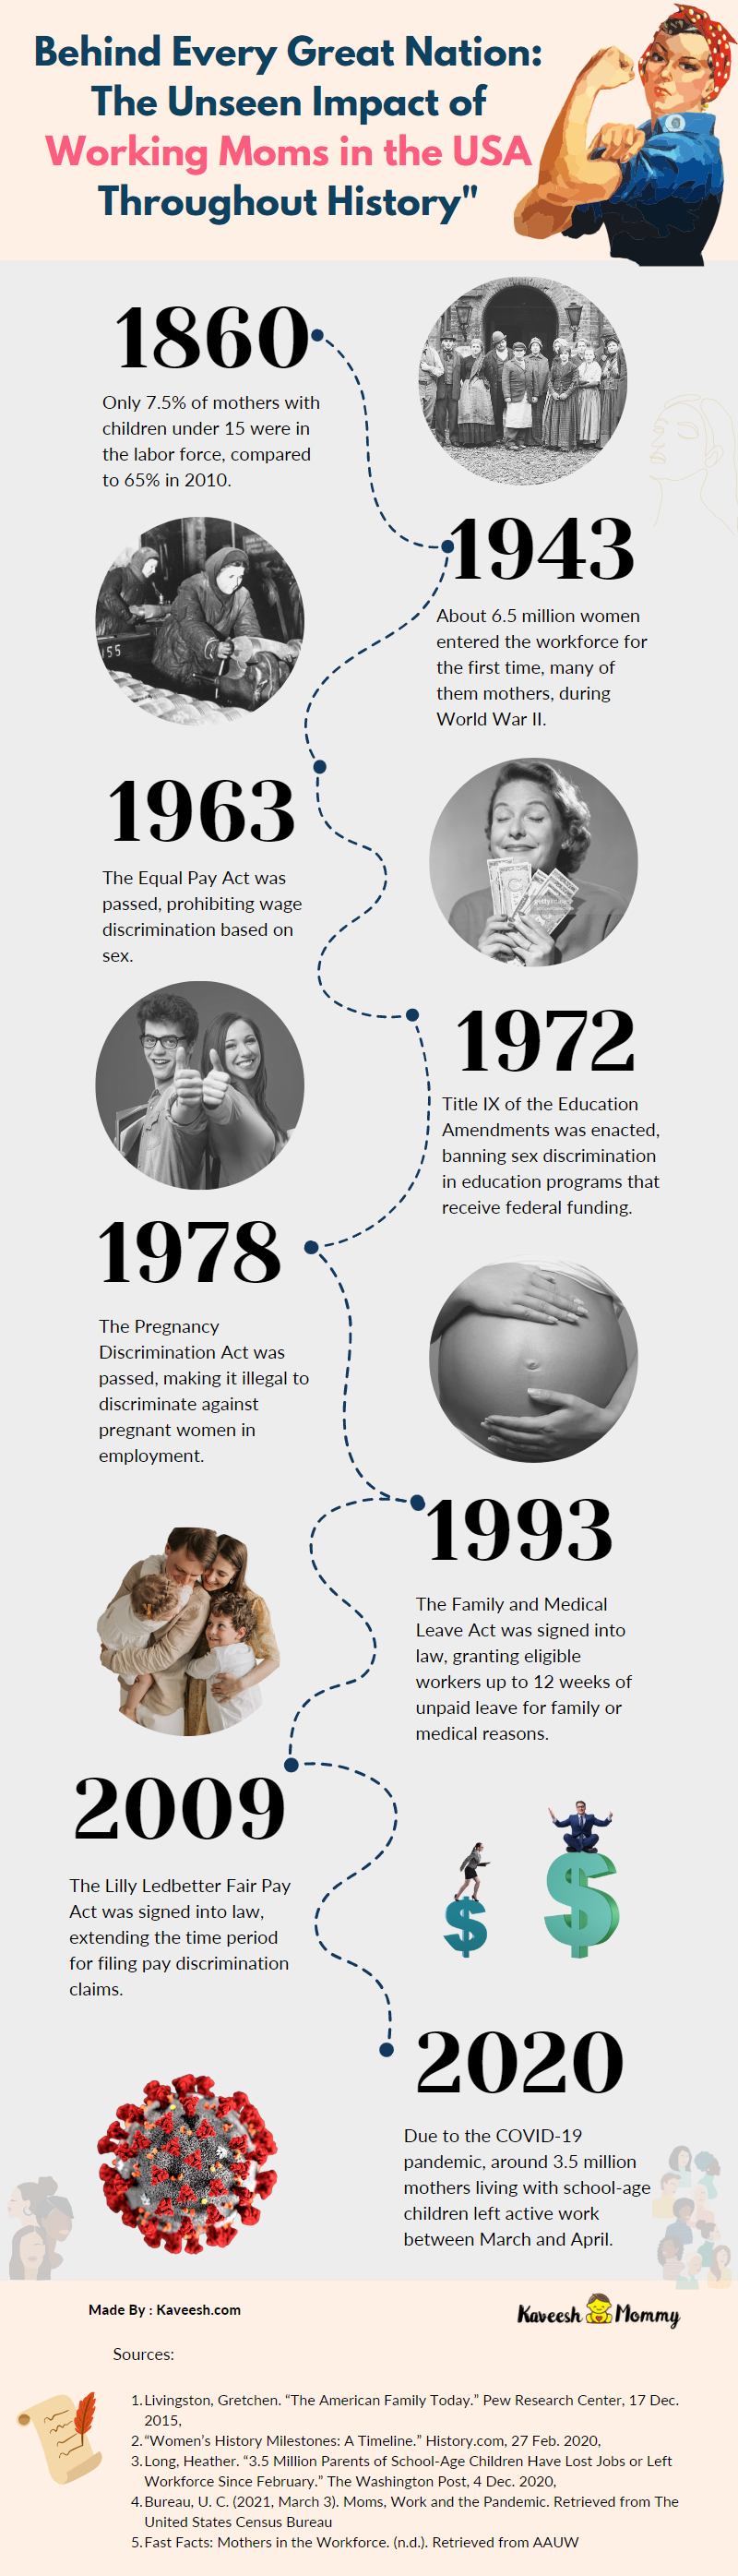 An infographic detailing the history of working mothers in the US, from the early 20th century to present day. The infographic highlights the various challenges and triumphs faced by working mothers, including societal expectations, workplace policies, and economic realities.